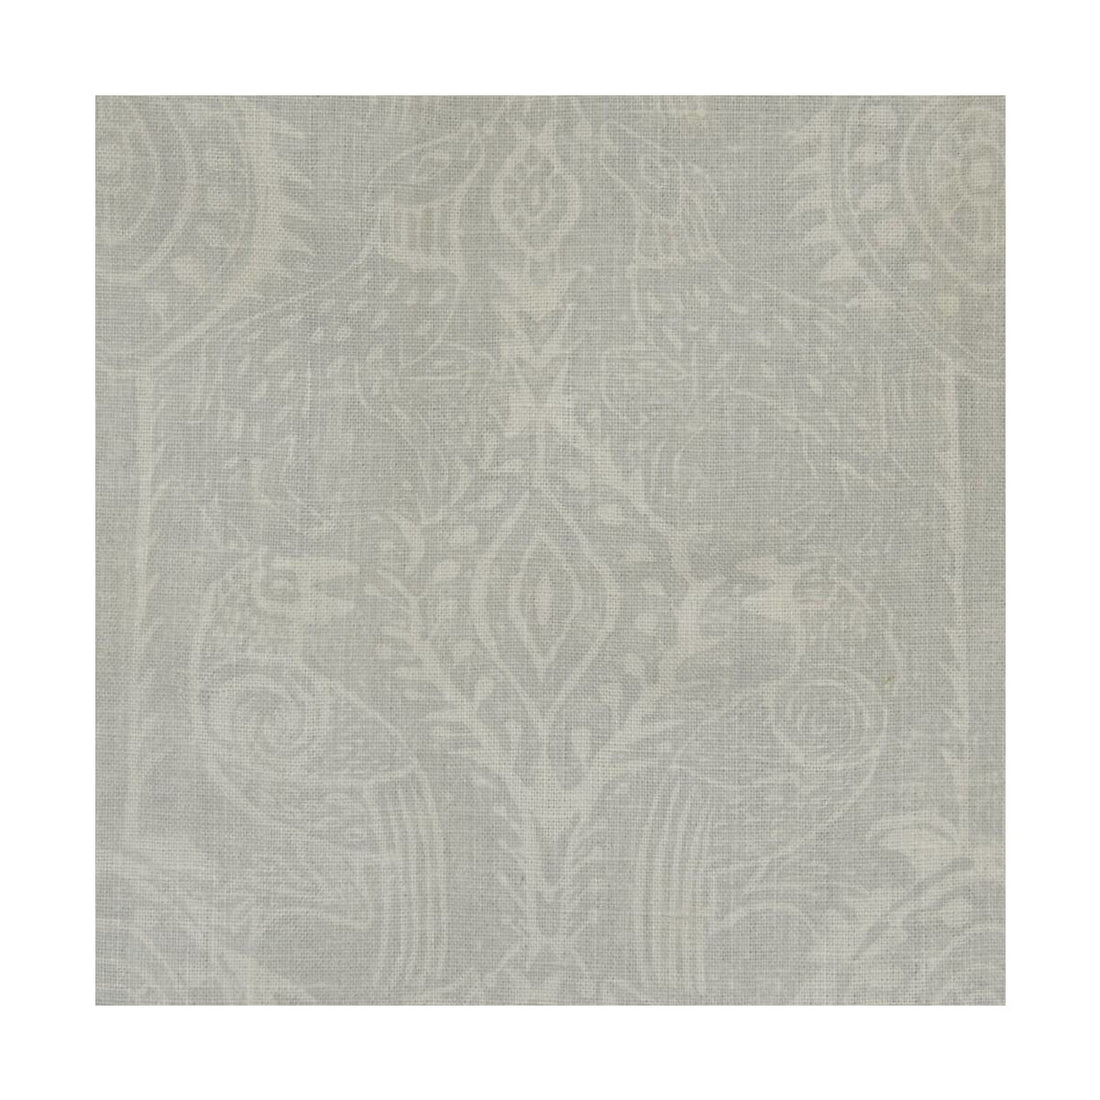 Beasties fabric in grey color - pattern BFC-3512.11.0 - by Lee Jofa in the Blithfield collection